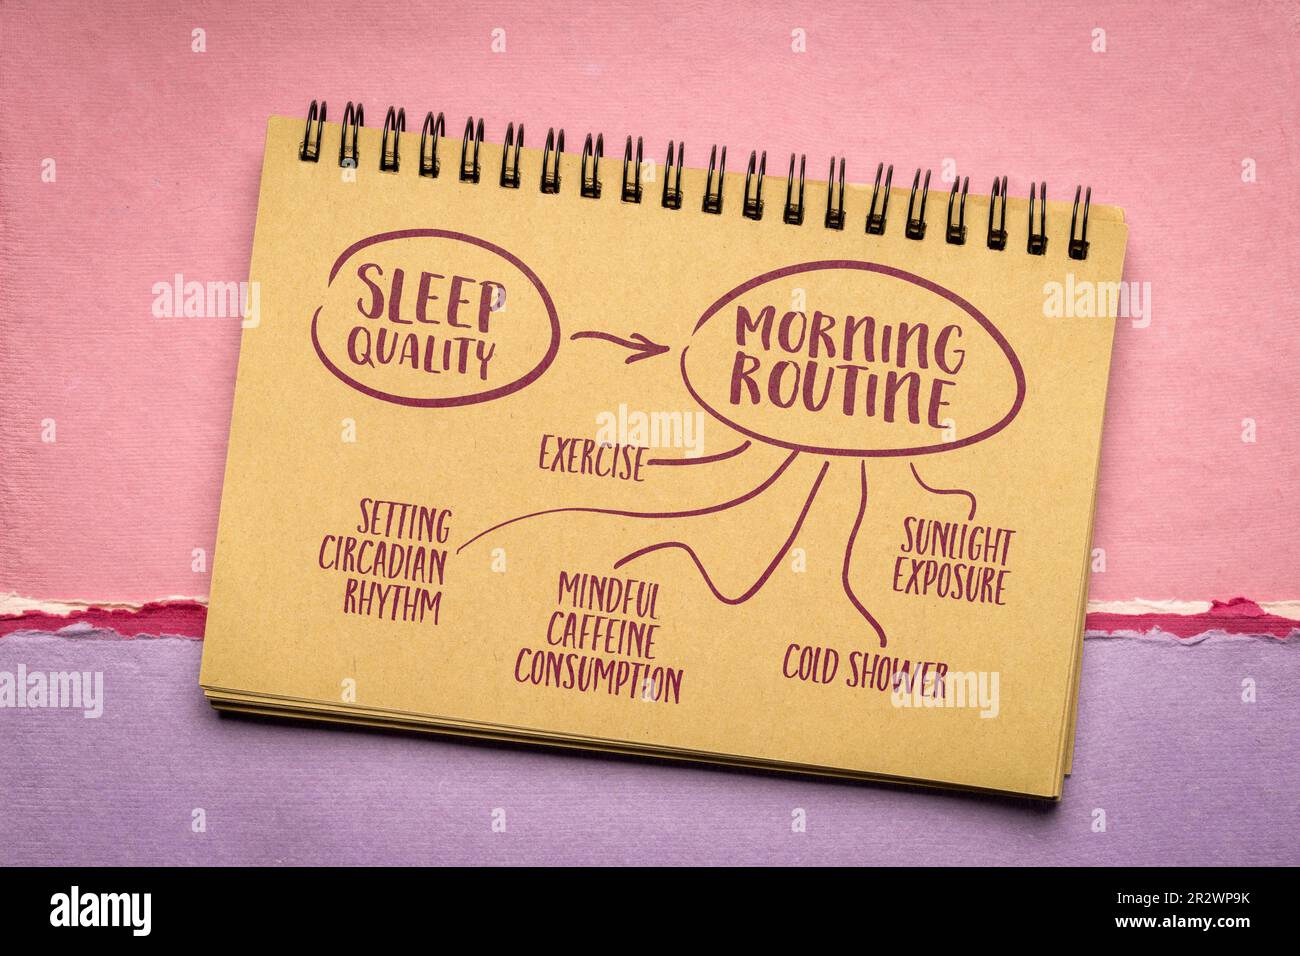 morning routine to set up circadian rhythm and improve sleep quality at night - mind map sketch in a notebook, healthy lifestyle, self care and person Stock Photo